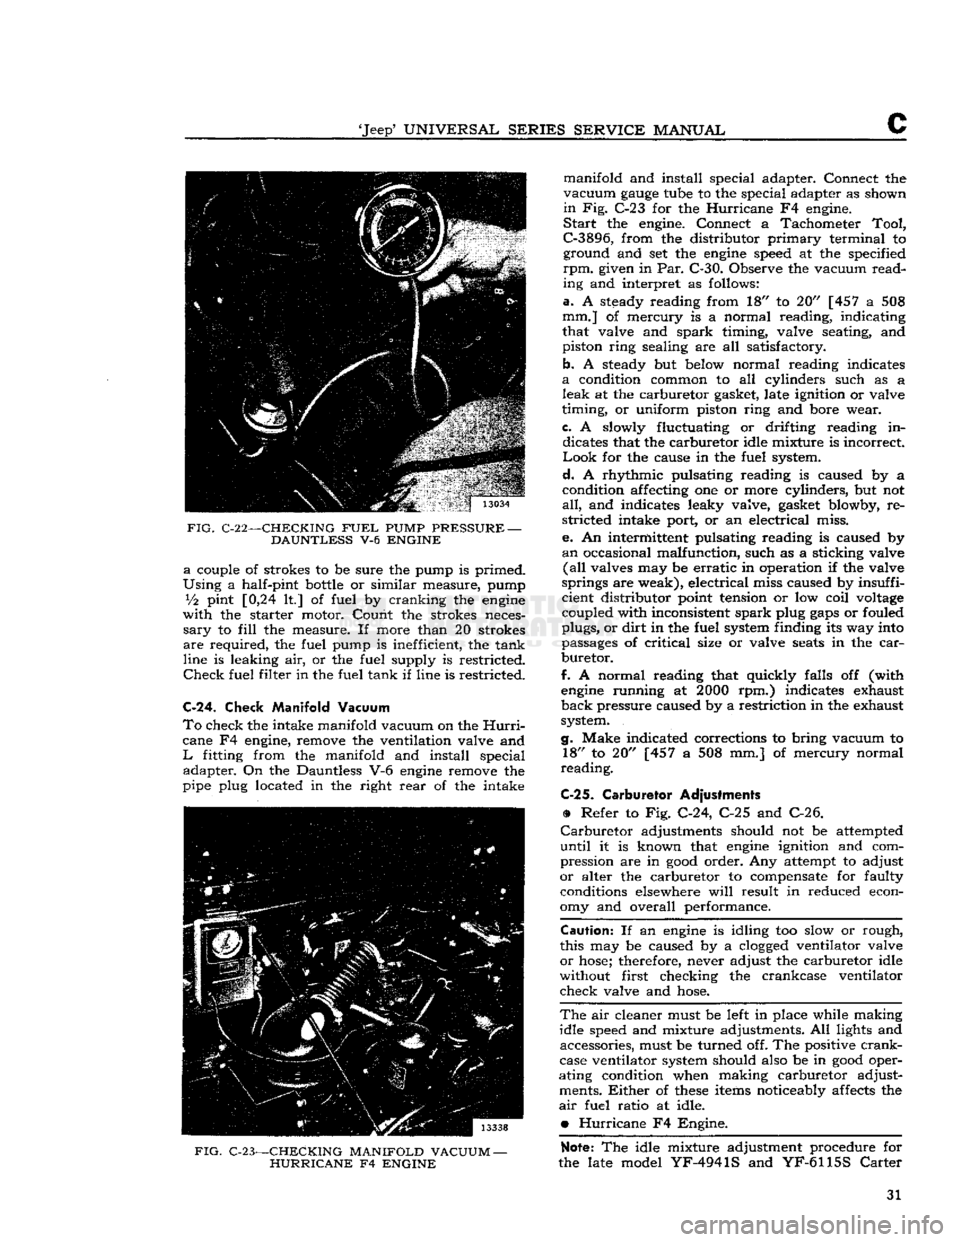 JEEP DJ 1953 User Guide 
Jeep
 UNIVERSAL
 SERIES
 SERVICE
 MANUAL 

C 

FIG.
 C-22—-CHECKING
 FUEL
 PUMP
 PRESSURE
 — 
 DAUNTLESS
 V-6
 ENGINE  a
 couple of strokes to be sure the pump is primed. 

Using
 a half-pint
 